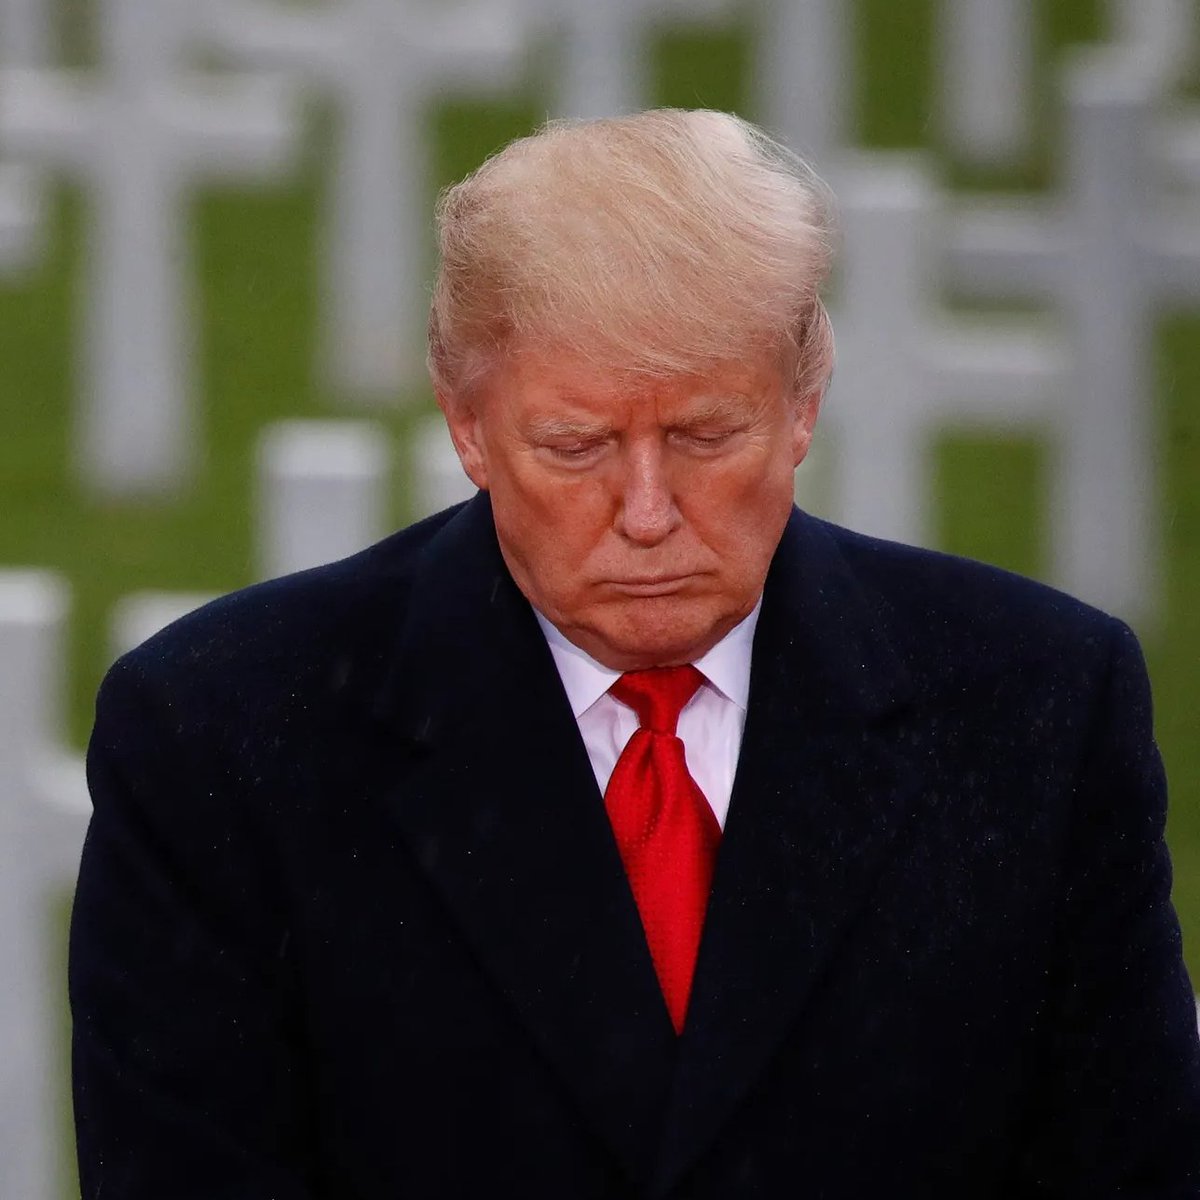 Every time I think I couldn't be more disgusted by trump, I am proven wrong. Remember the story about him calling fallen veterans 'losers' and 'suckers?' This one is somehow WORSE: In an article from The Atlantic, General Mark Milley selected a wounded veteran, Luis Avila, to…